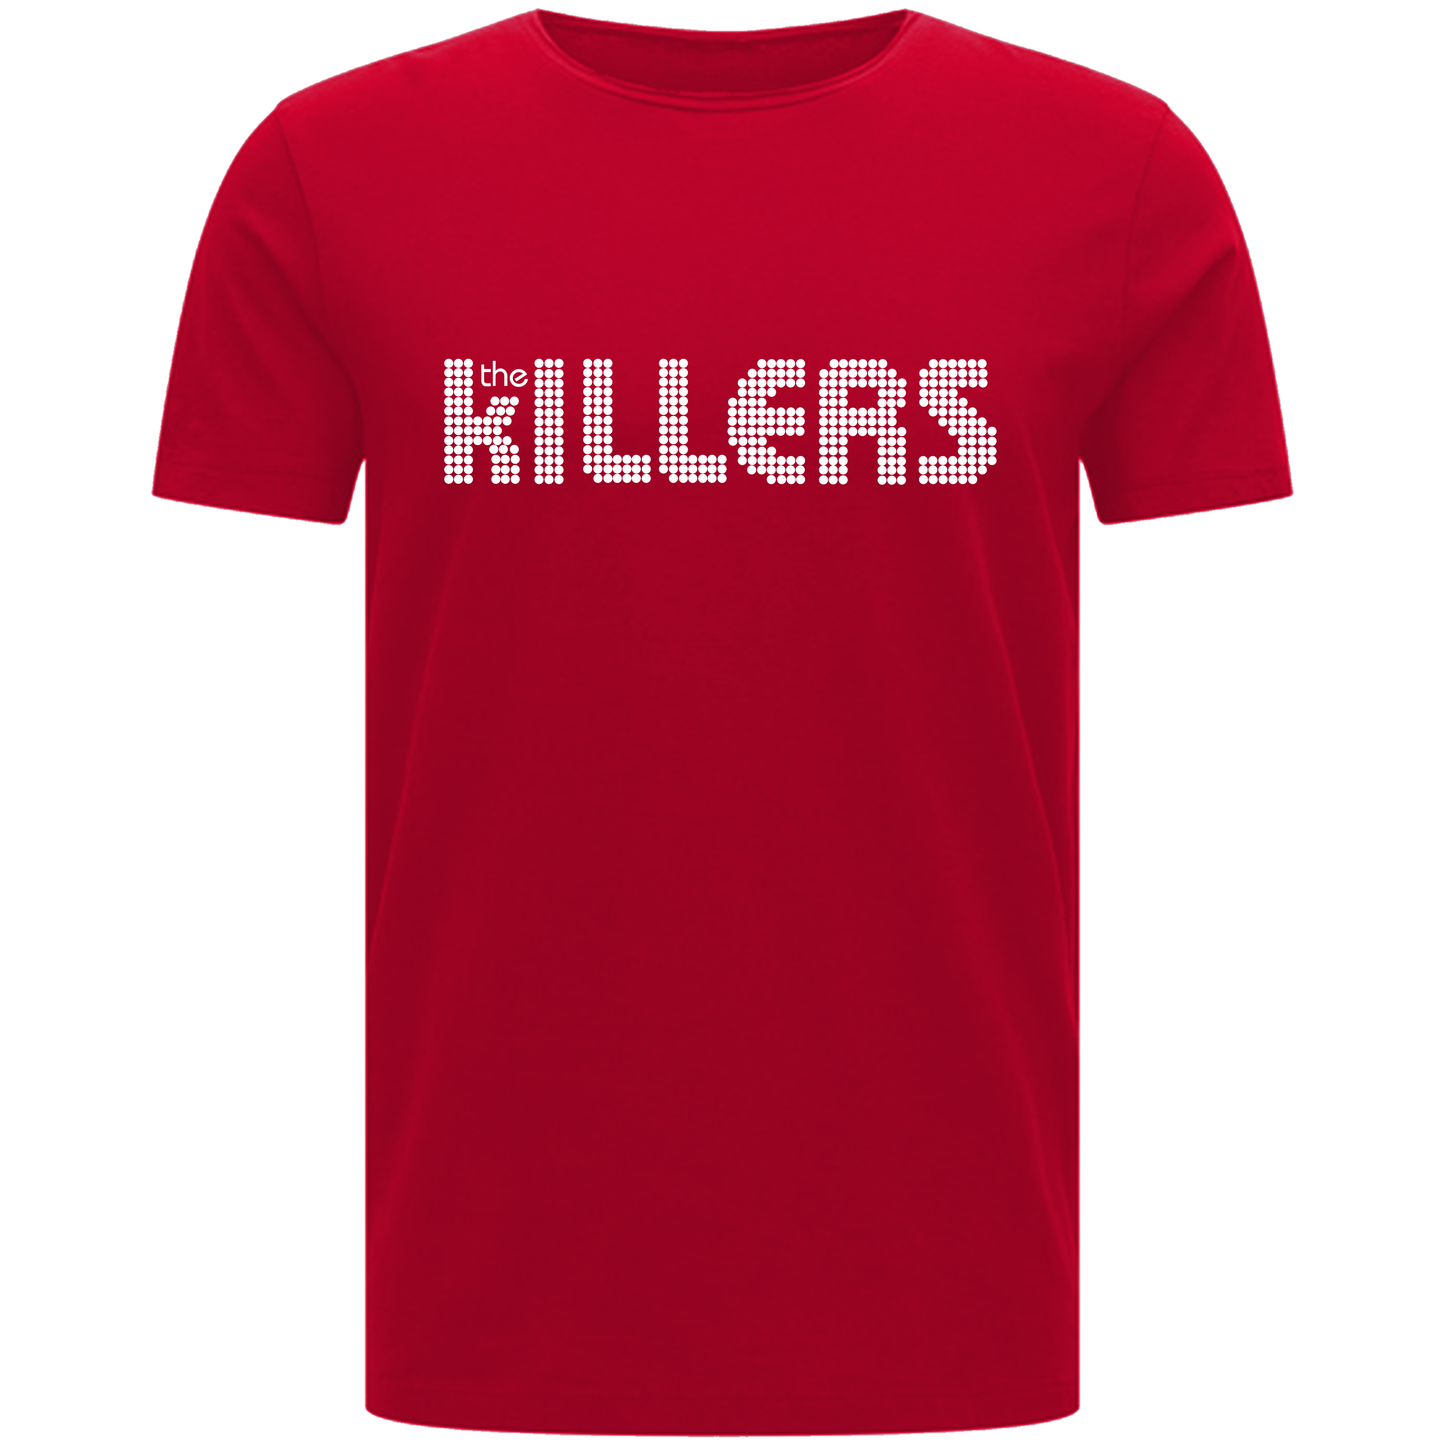 Top Rock Band The Killers Logo Men's T-shirt Rock Music Lovers Fashion –  ASR Personalise